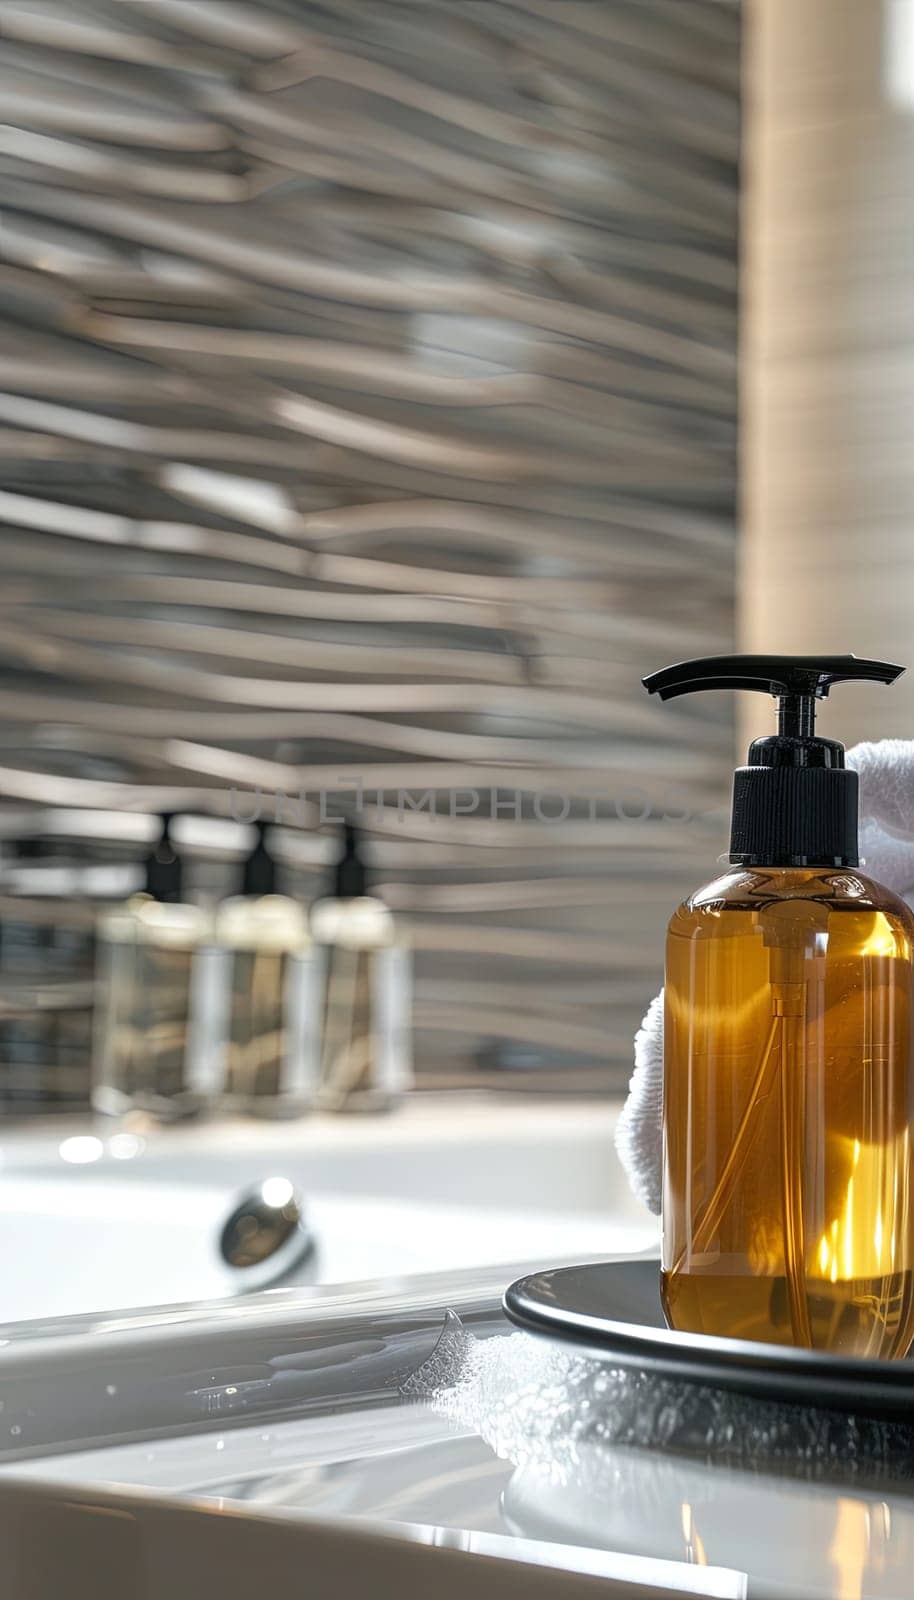 Closeup of stylish shampoo and conditioner bottles in a modern bathroom setting.